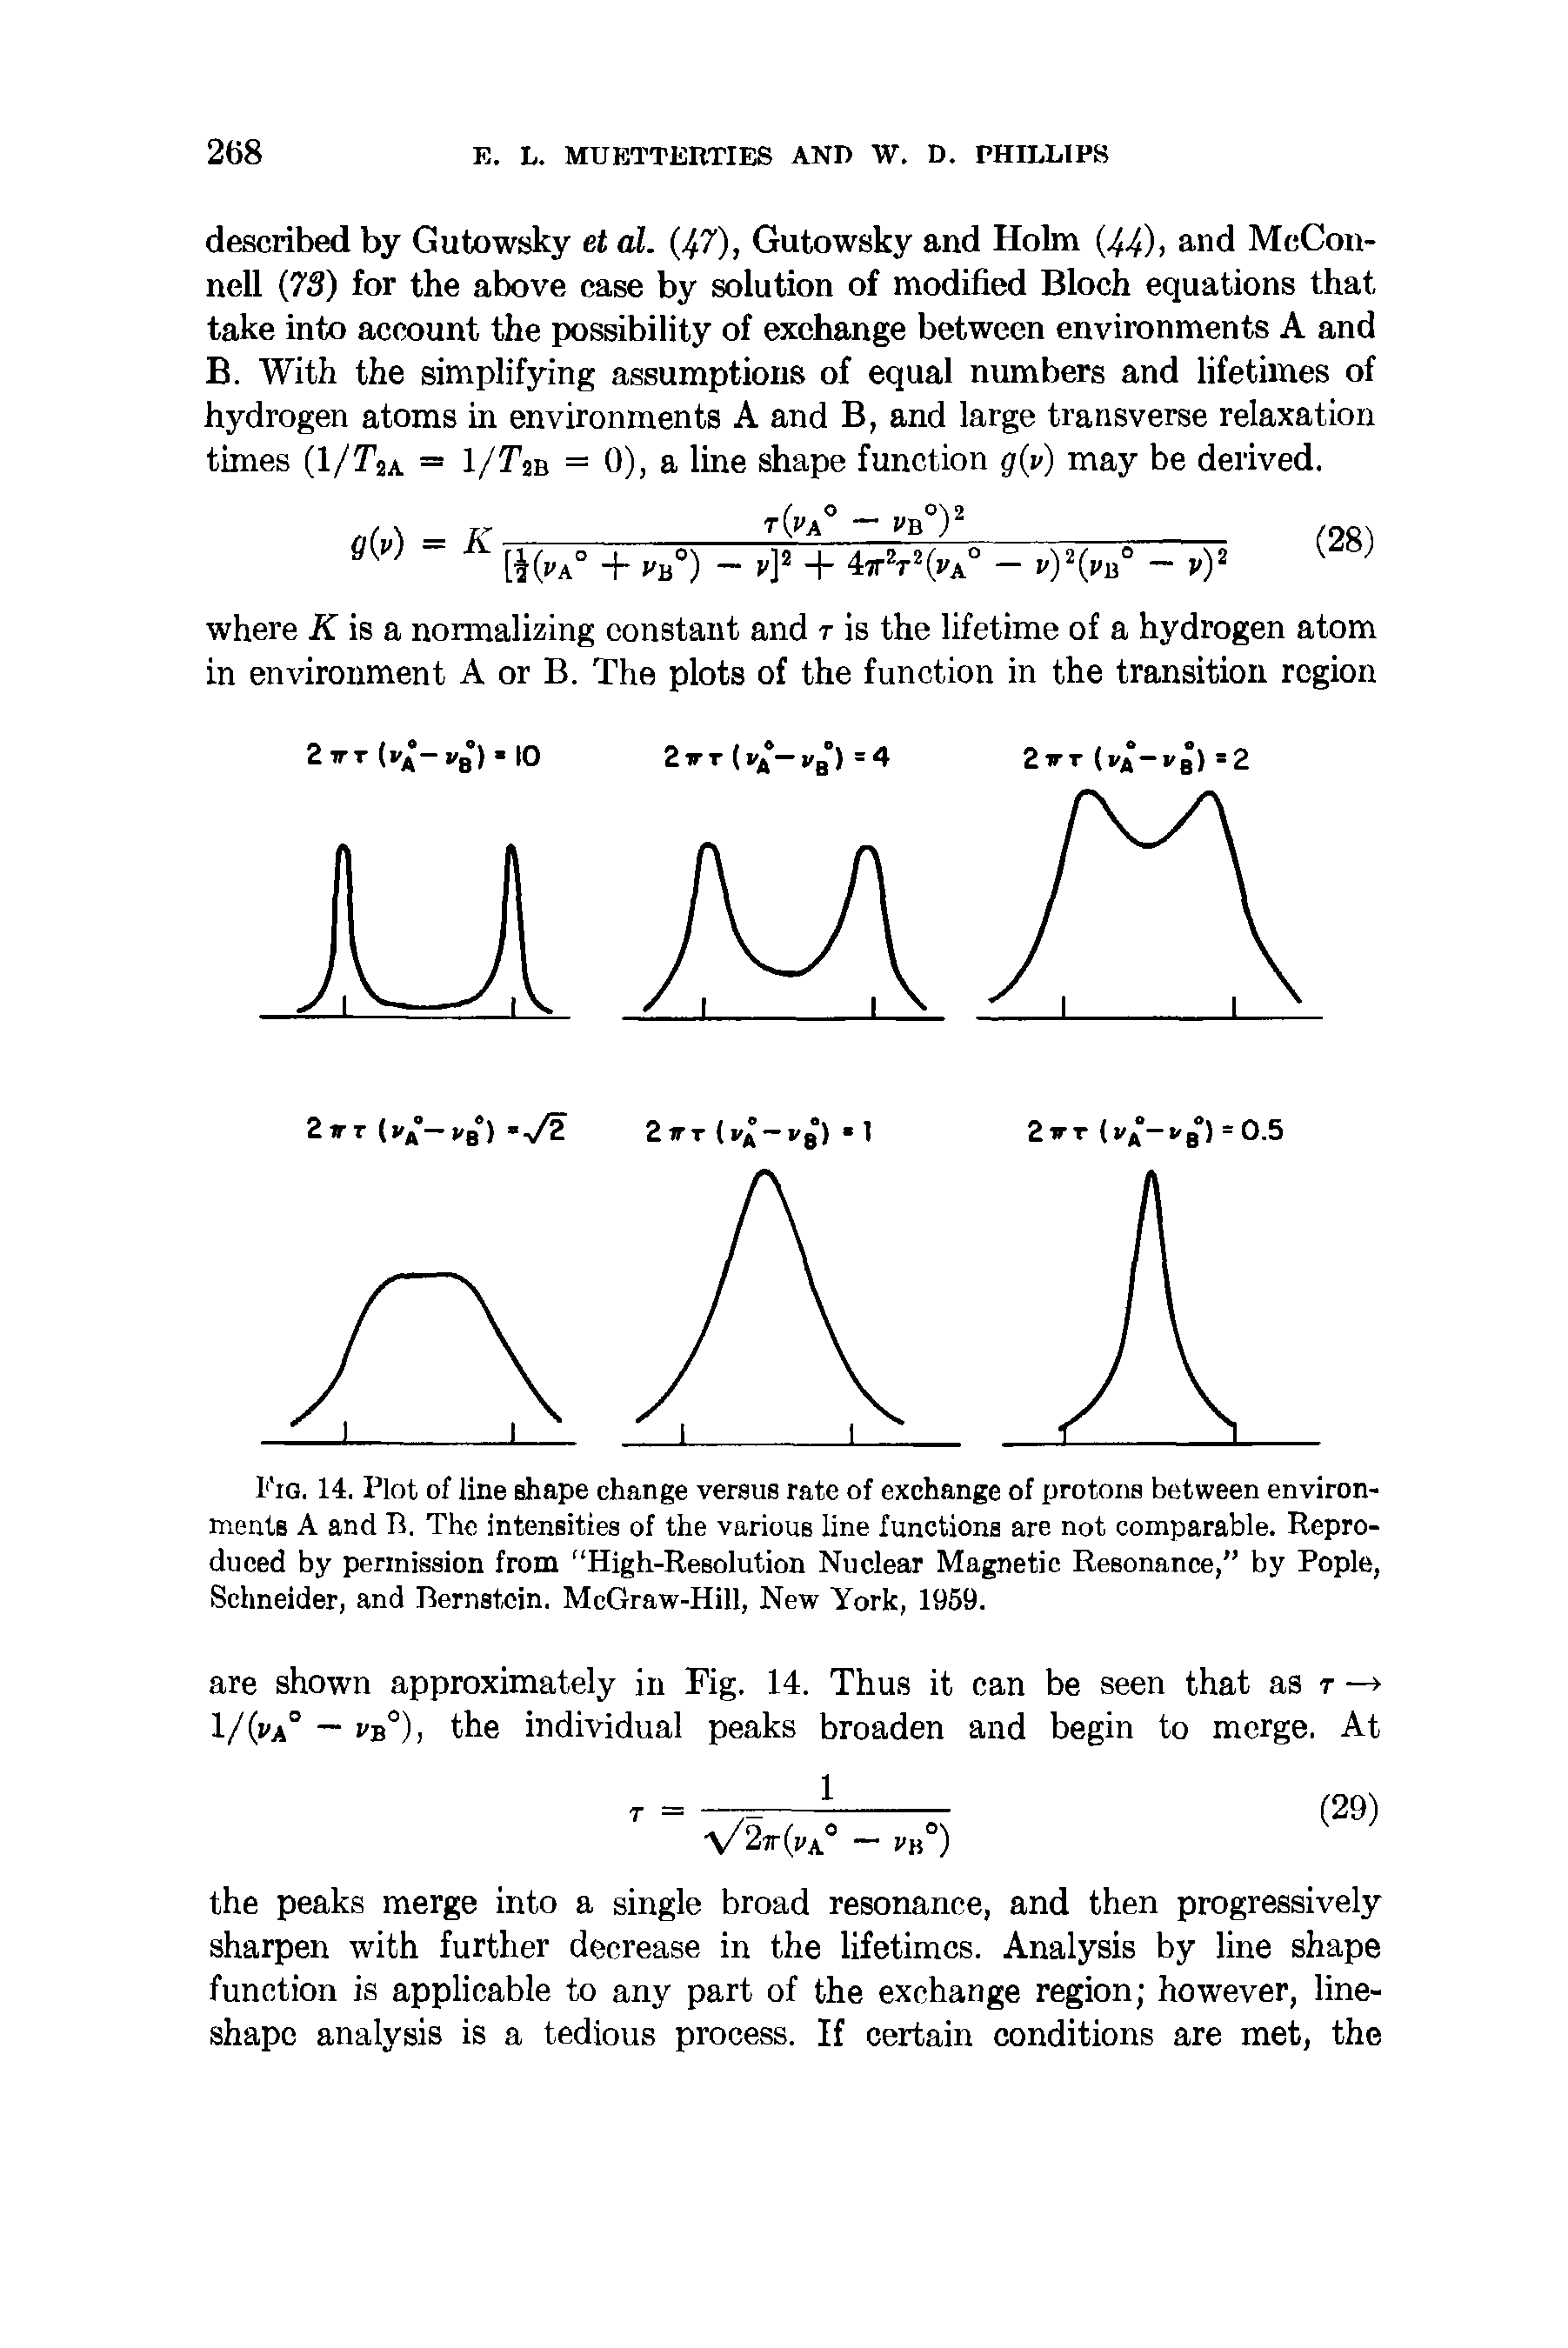 Fig. 14. Plot of line shape change versus rate of exchange of protons between environments A and B. The intensities of the various line functions are not comparable. Reproduced by permission from "High-Resolution Nuclear Magnetic Resonance, by Pople, Schneider, and Bernstein. McGraw-Hill, New York, 1959.